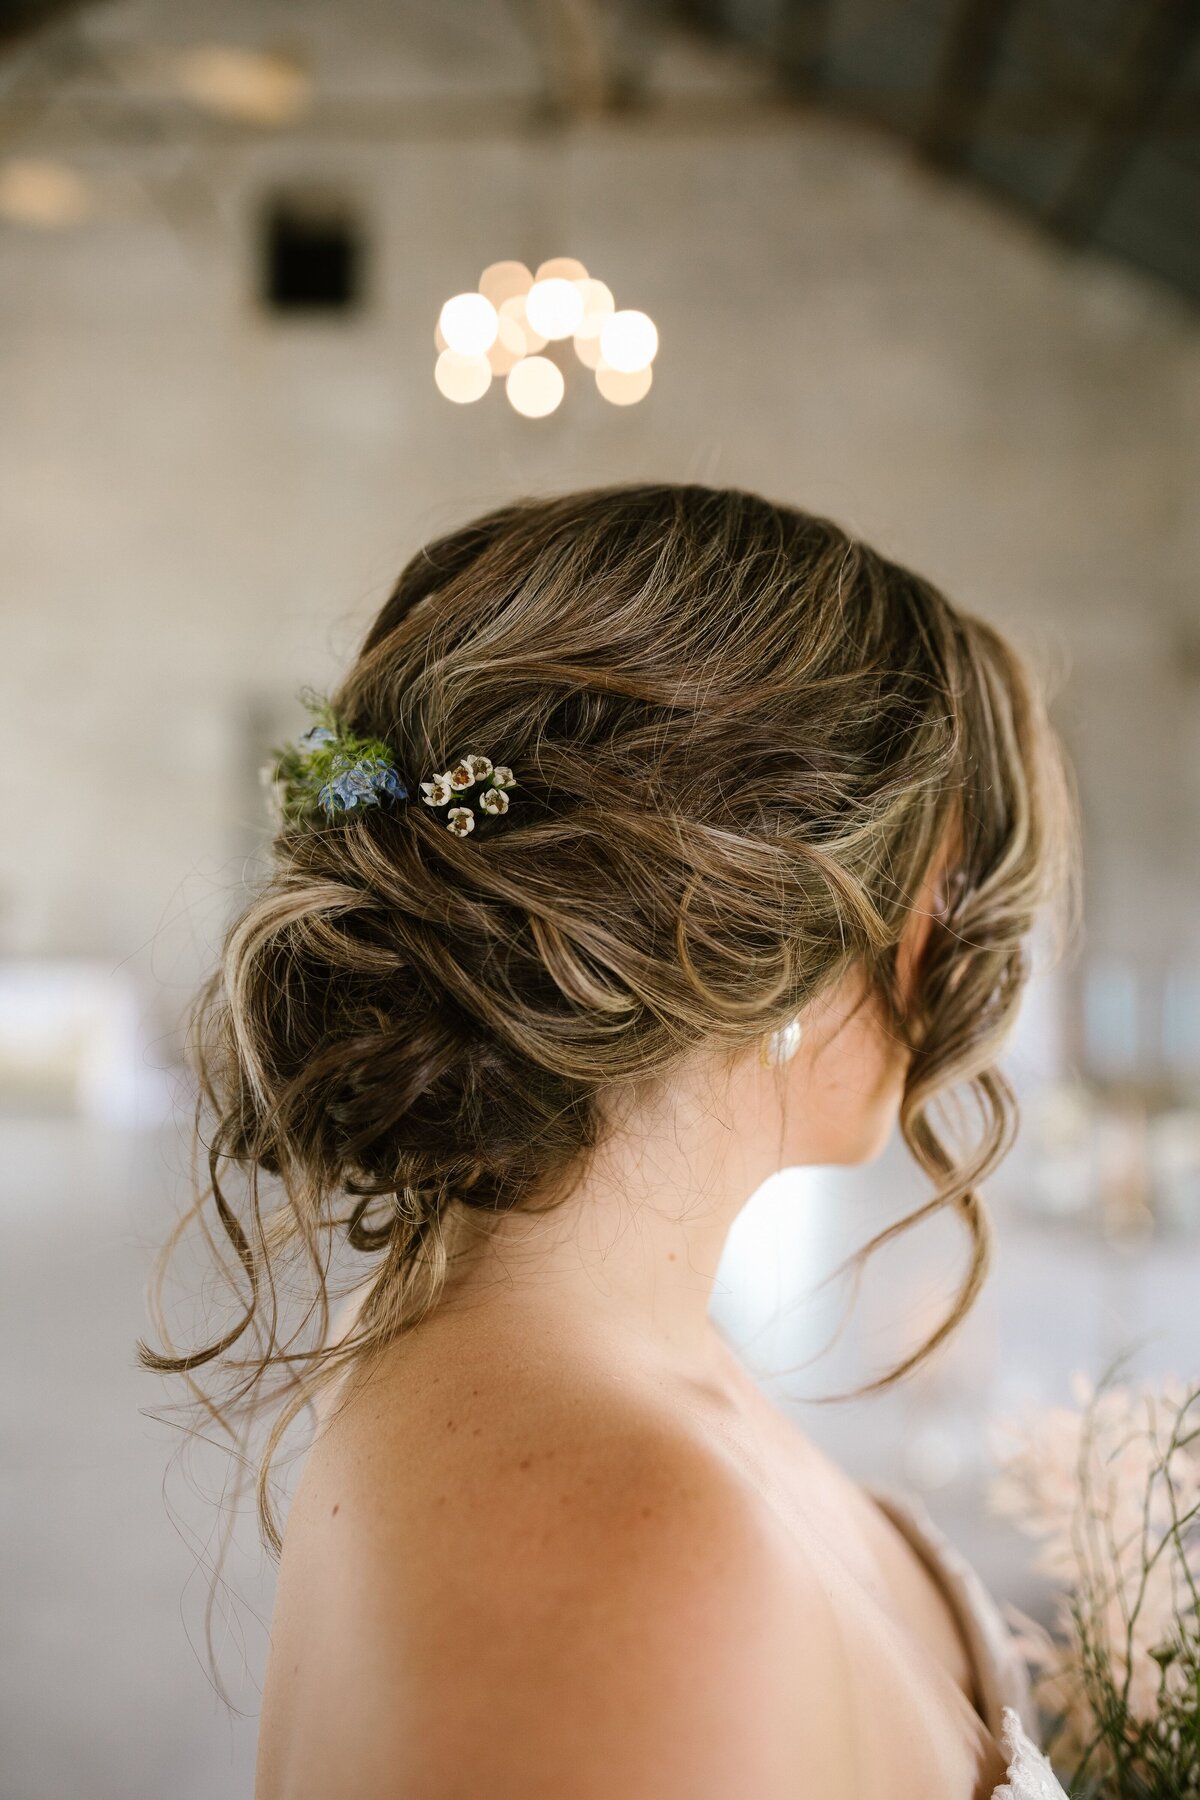 Lilly Bridal Artistry - Hair and Makeup Services - Spring, Texas